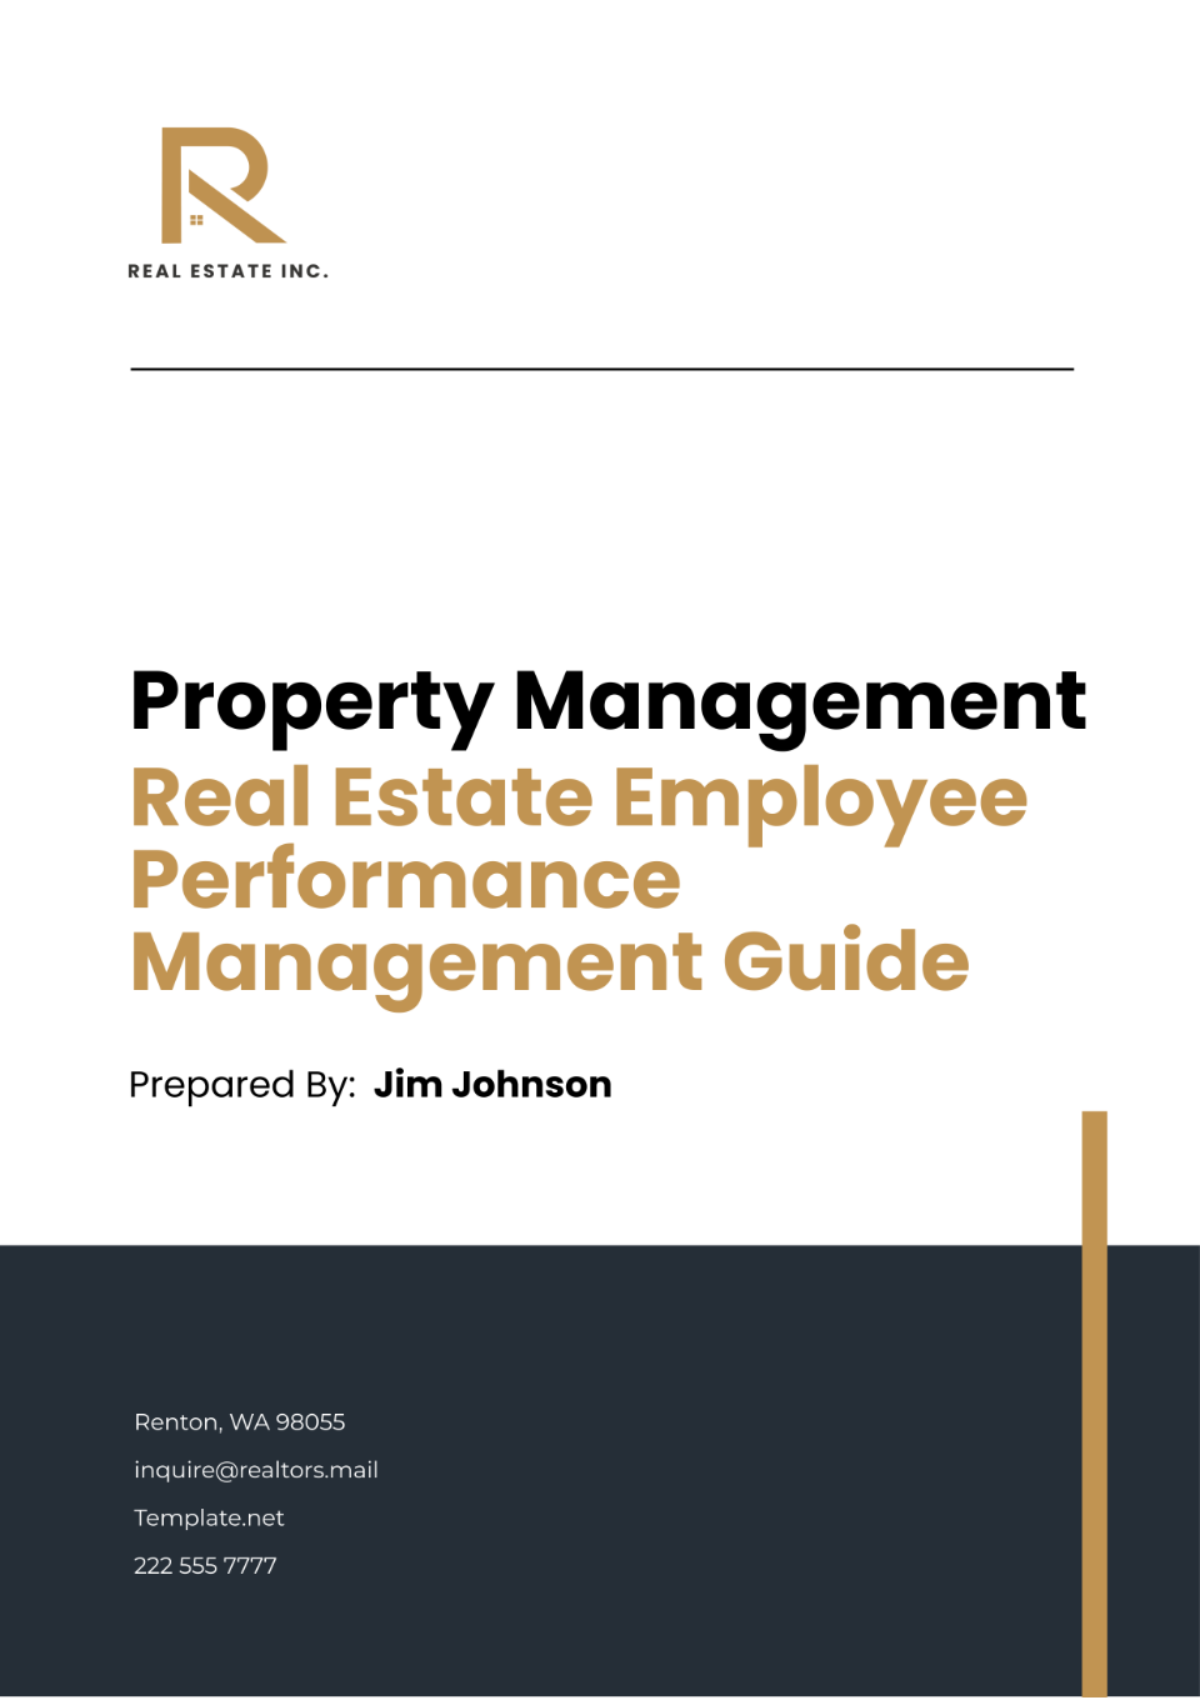 Real Estate Employee Performance Management Guide Template